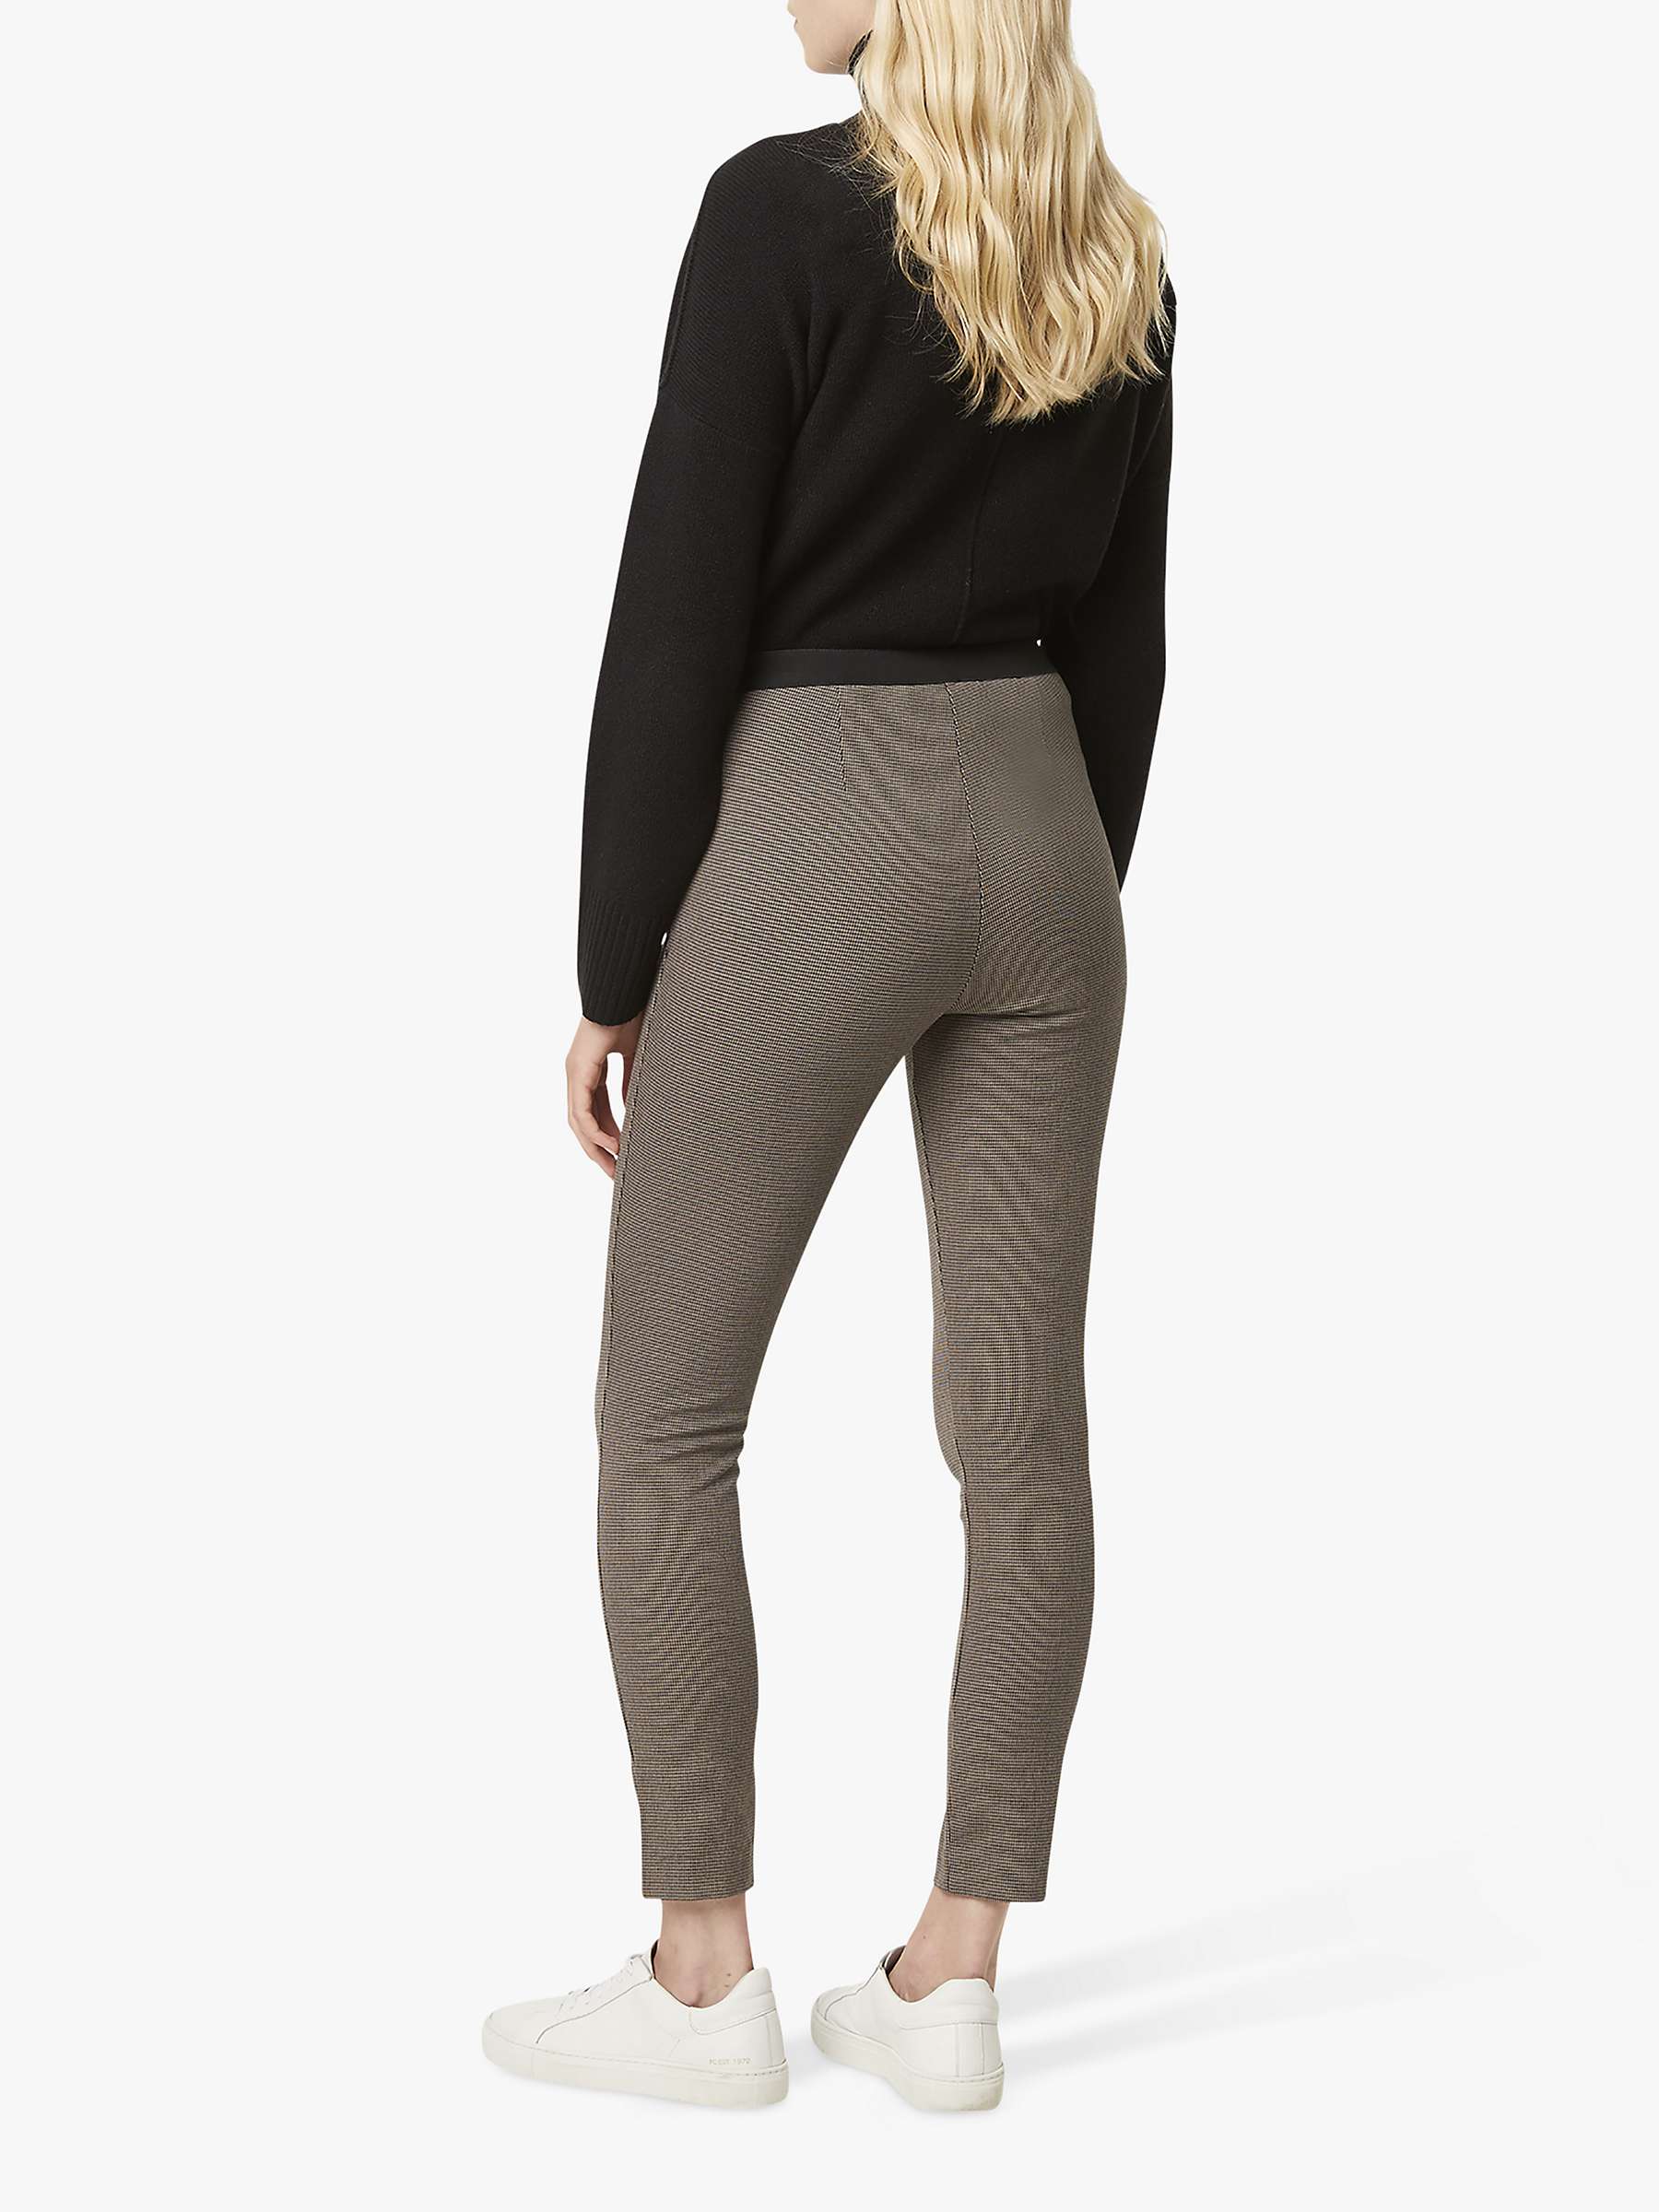 Buy French Connection Calimero Mini Dogtooth Skinny Trousers, Grey/Multi Online at johnlewis.com